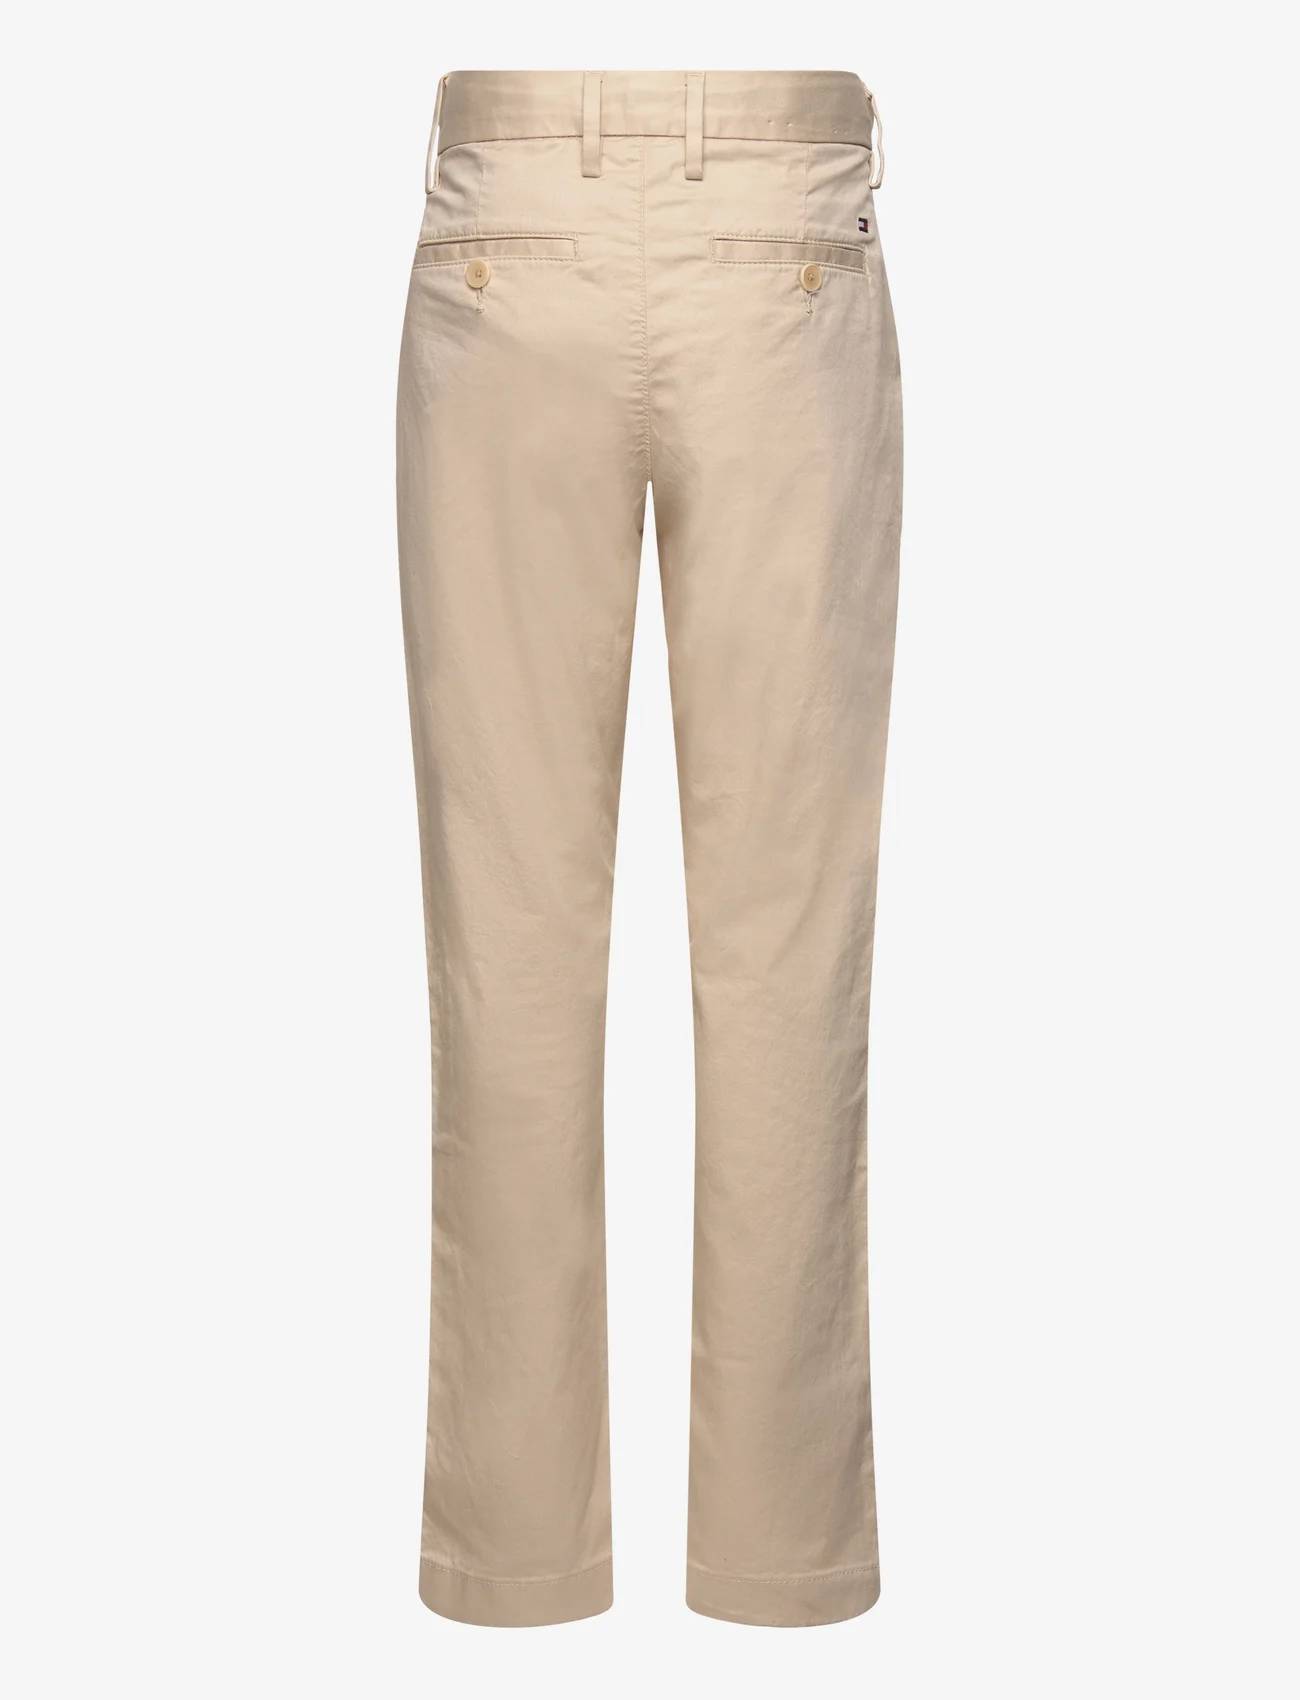 Tommy Hilfiger - 1985 CHINO PANTS - gode sommertilbud - classic beige - 1